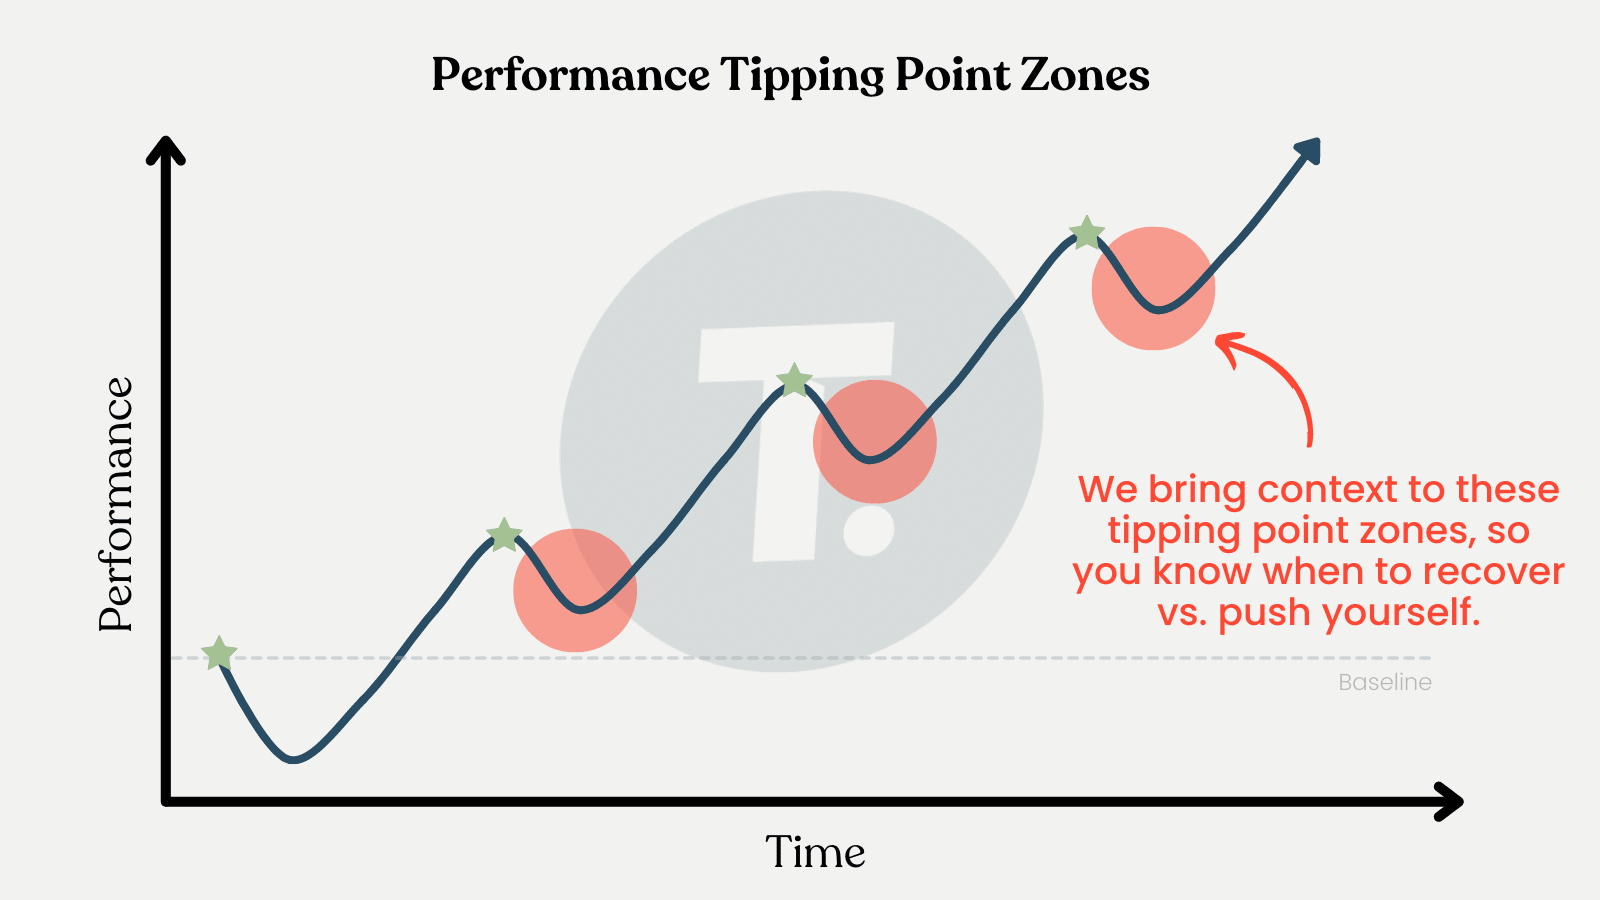 Performance tipping point zones